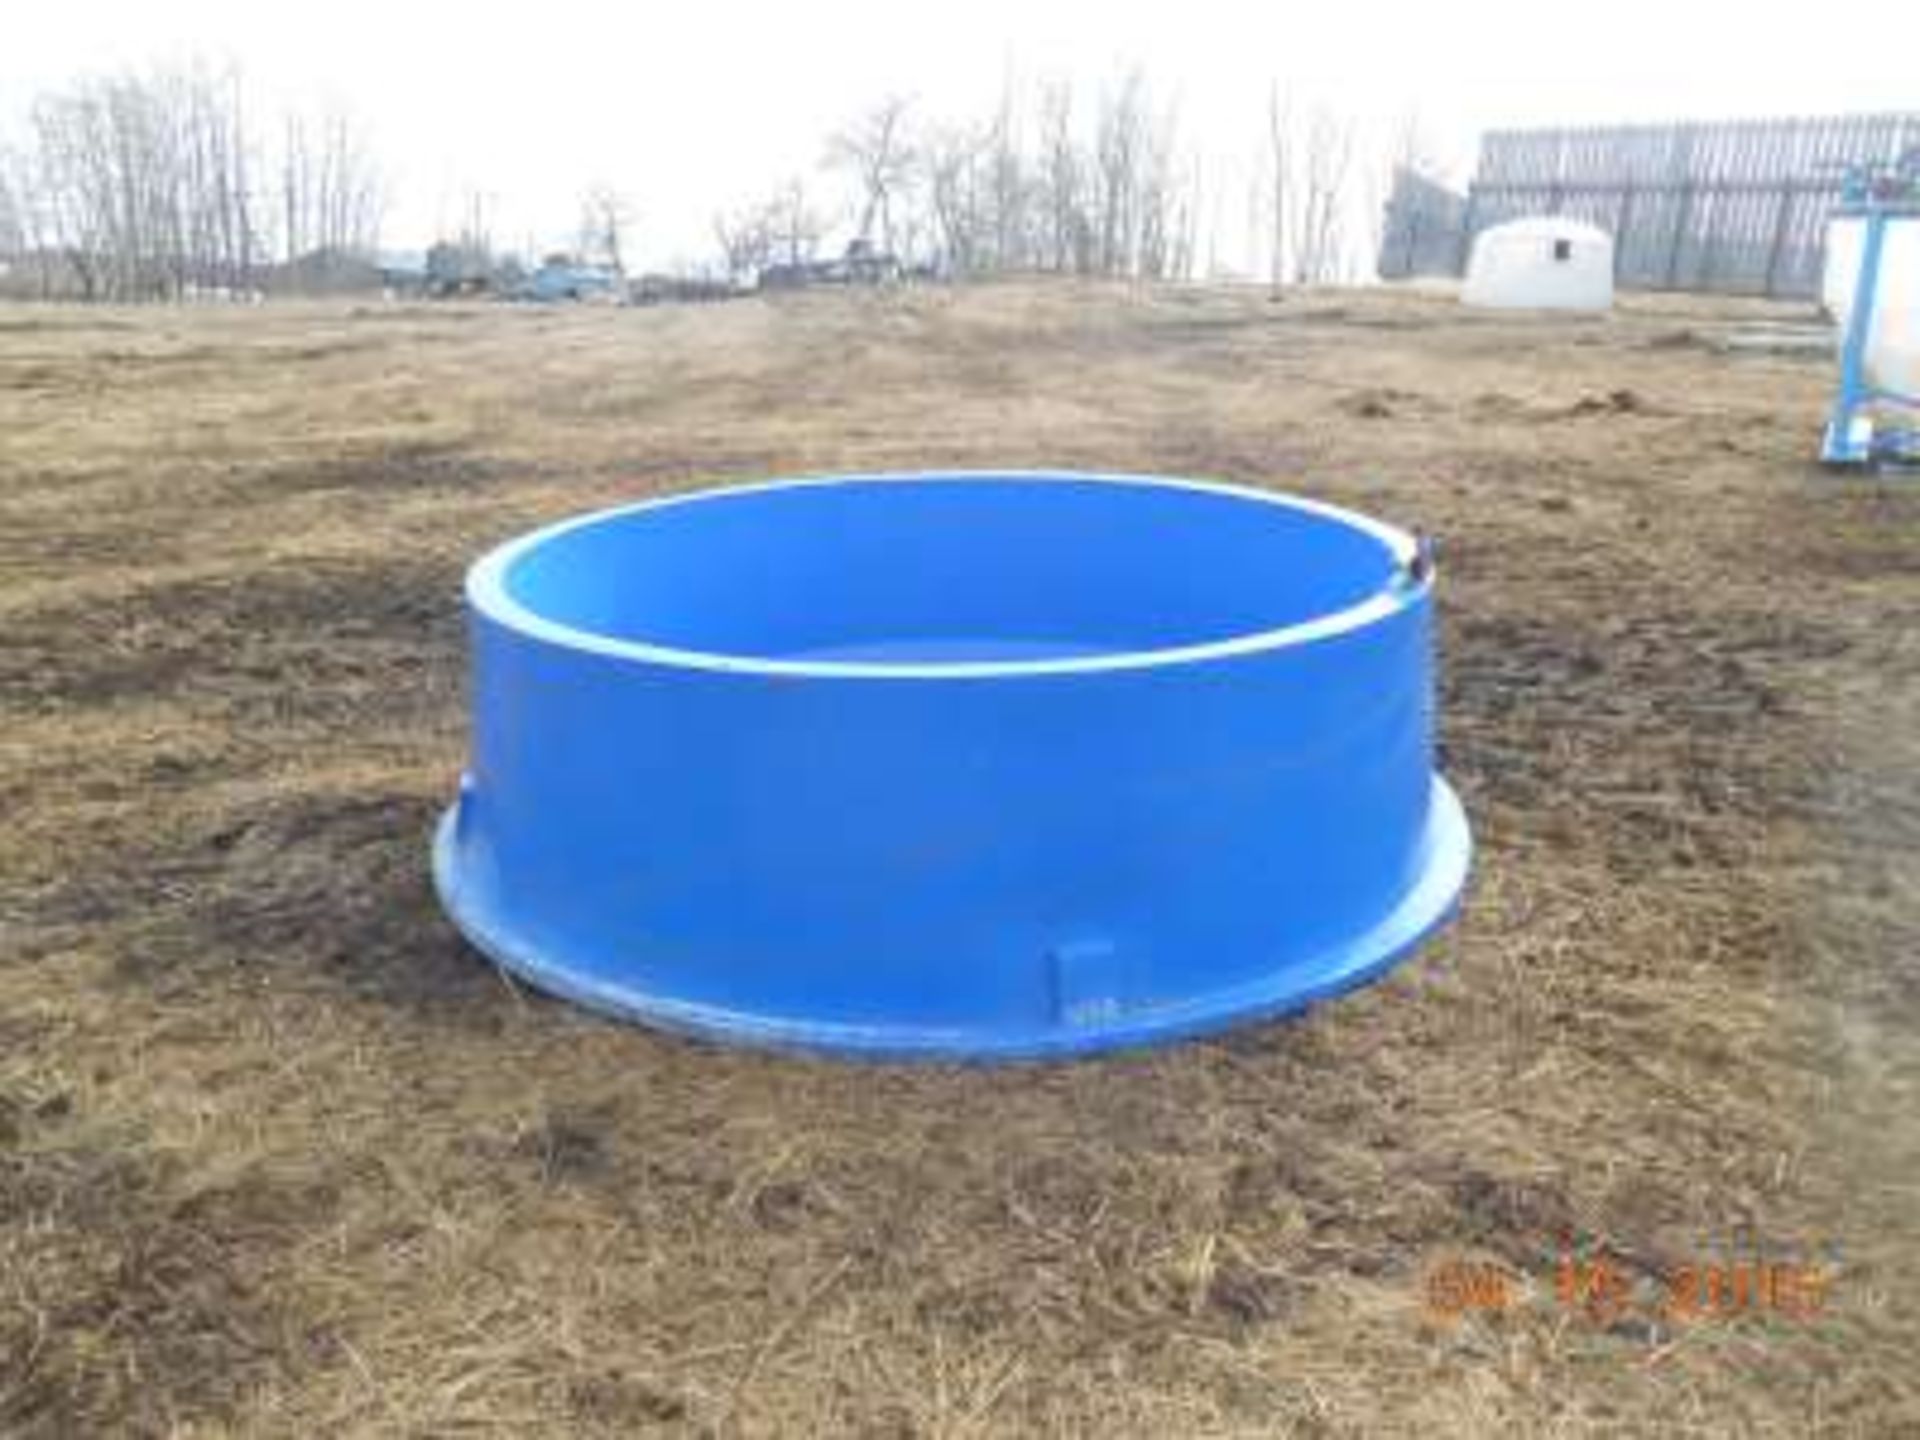 8â€™ round poly Water trough with floating pump